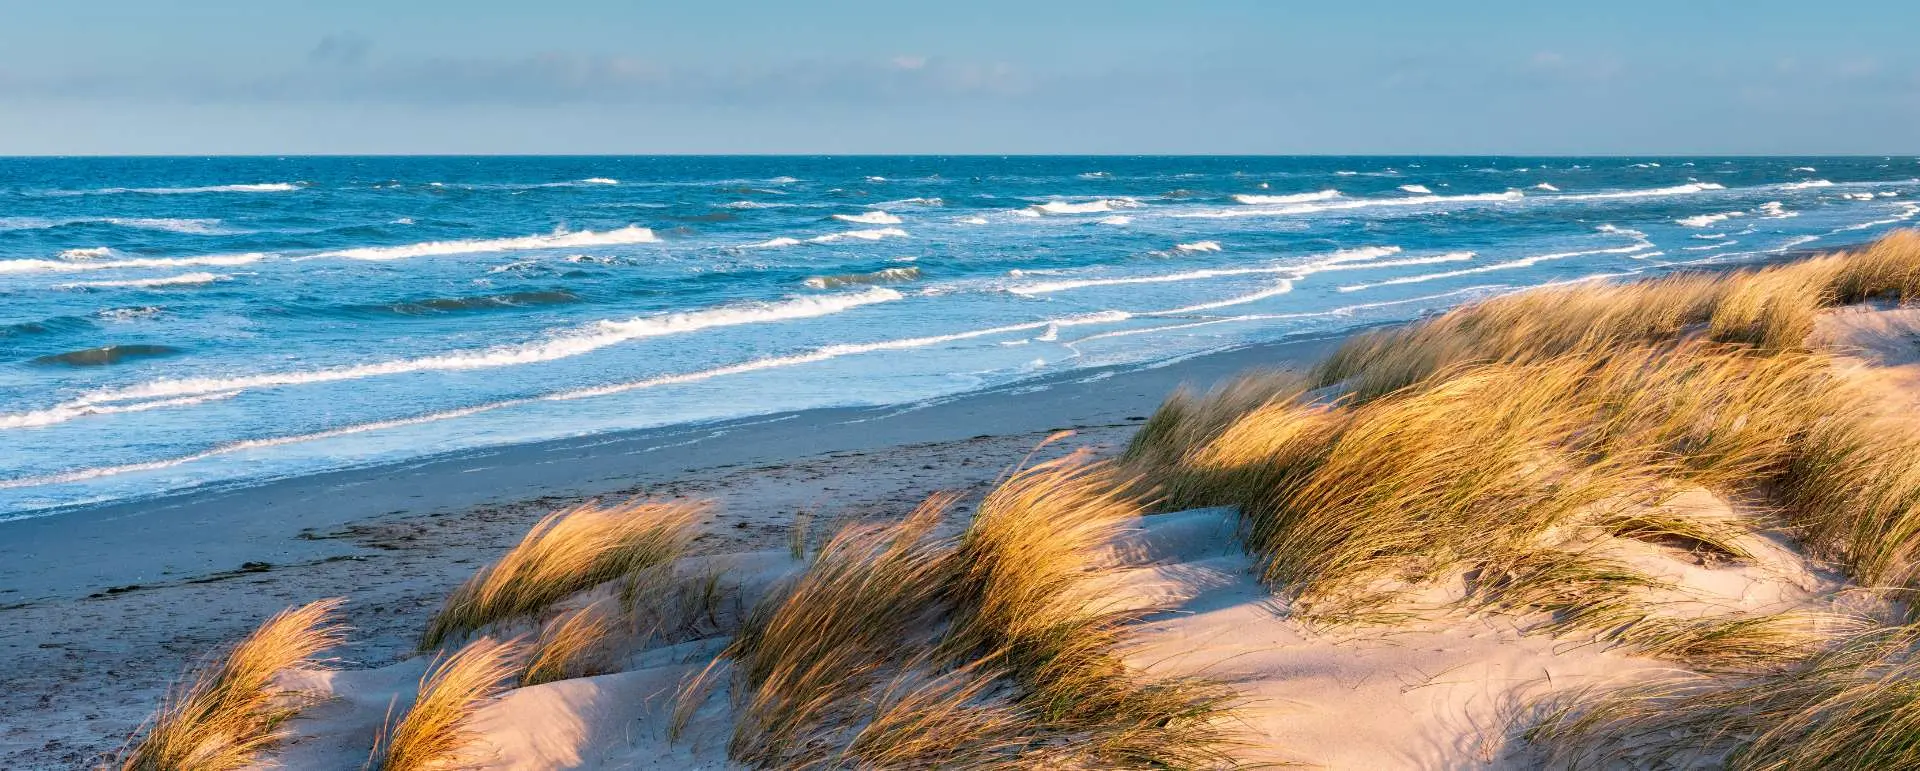 Fischland-Darß-Zingst - the destination for company trips